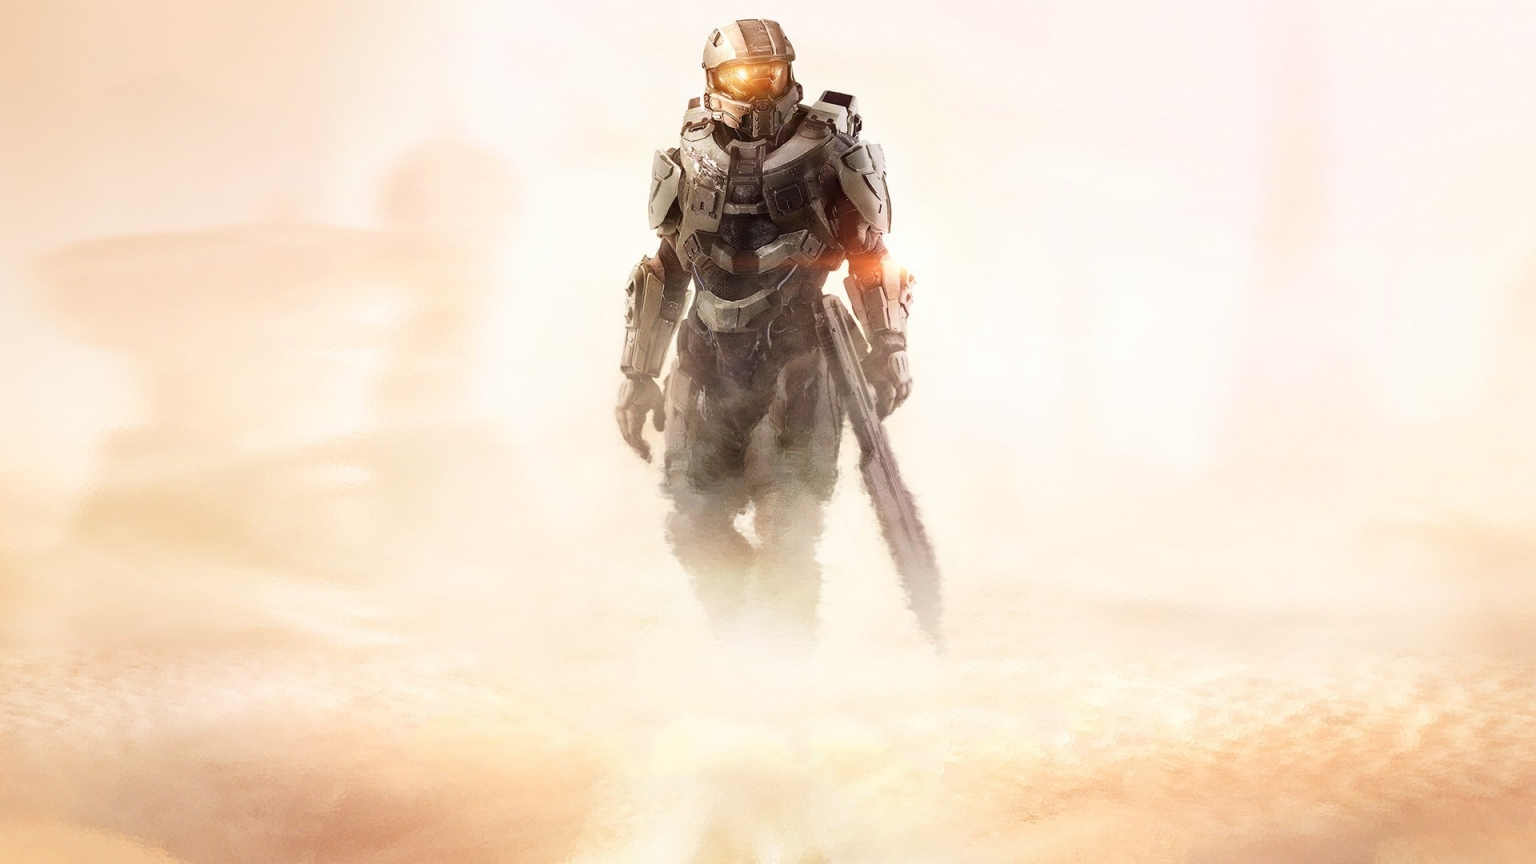 Halo 5 Guardians for 1536 x 864 HDTV resolution